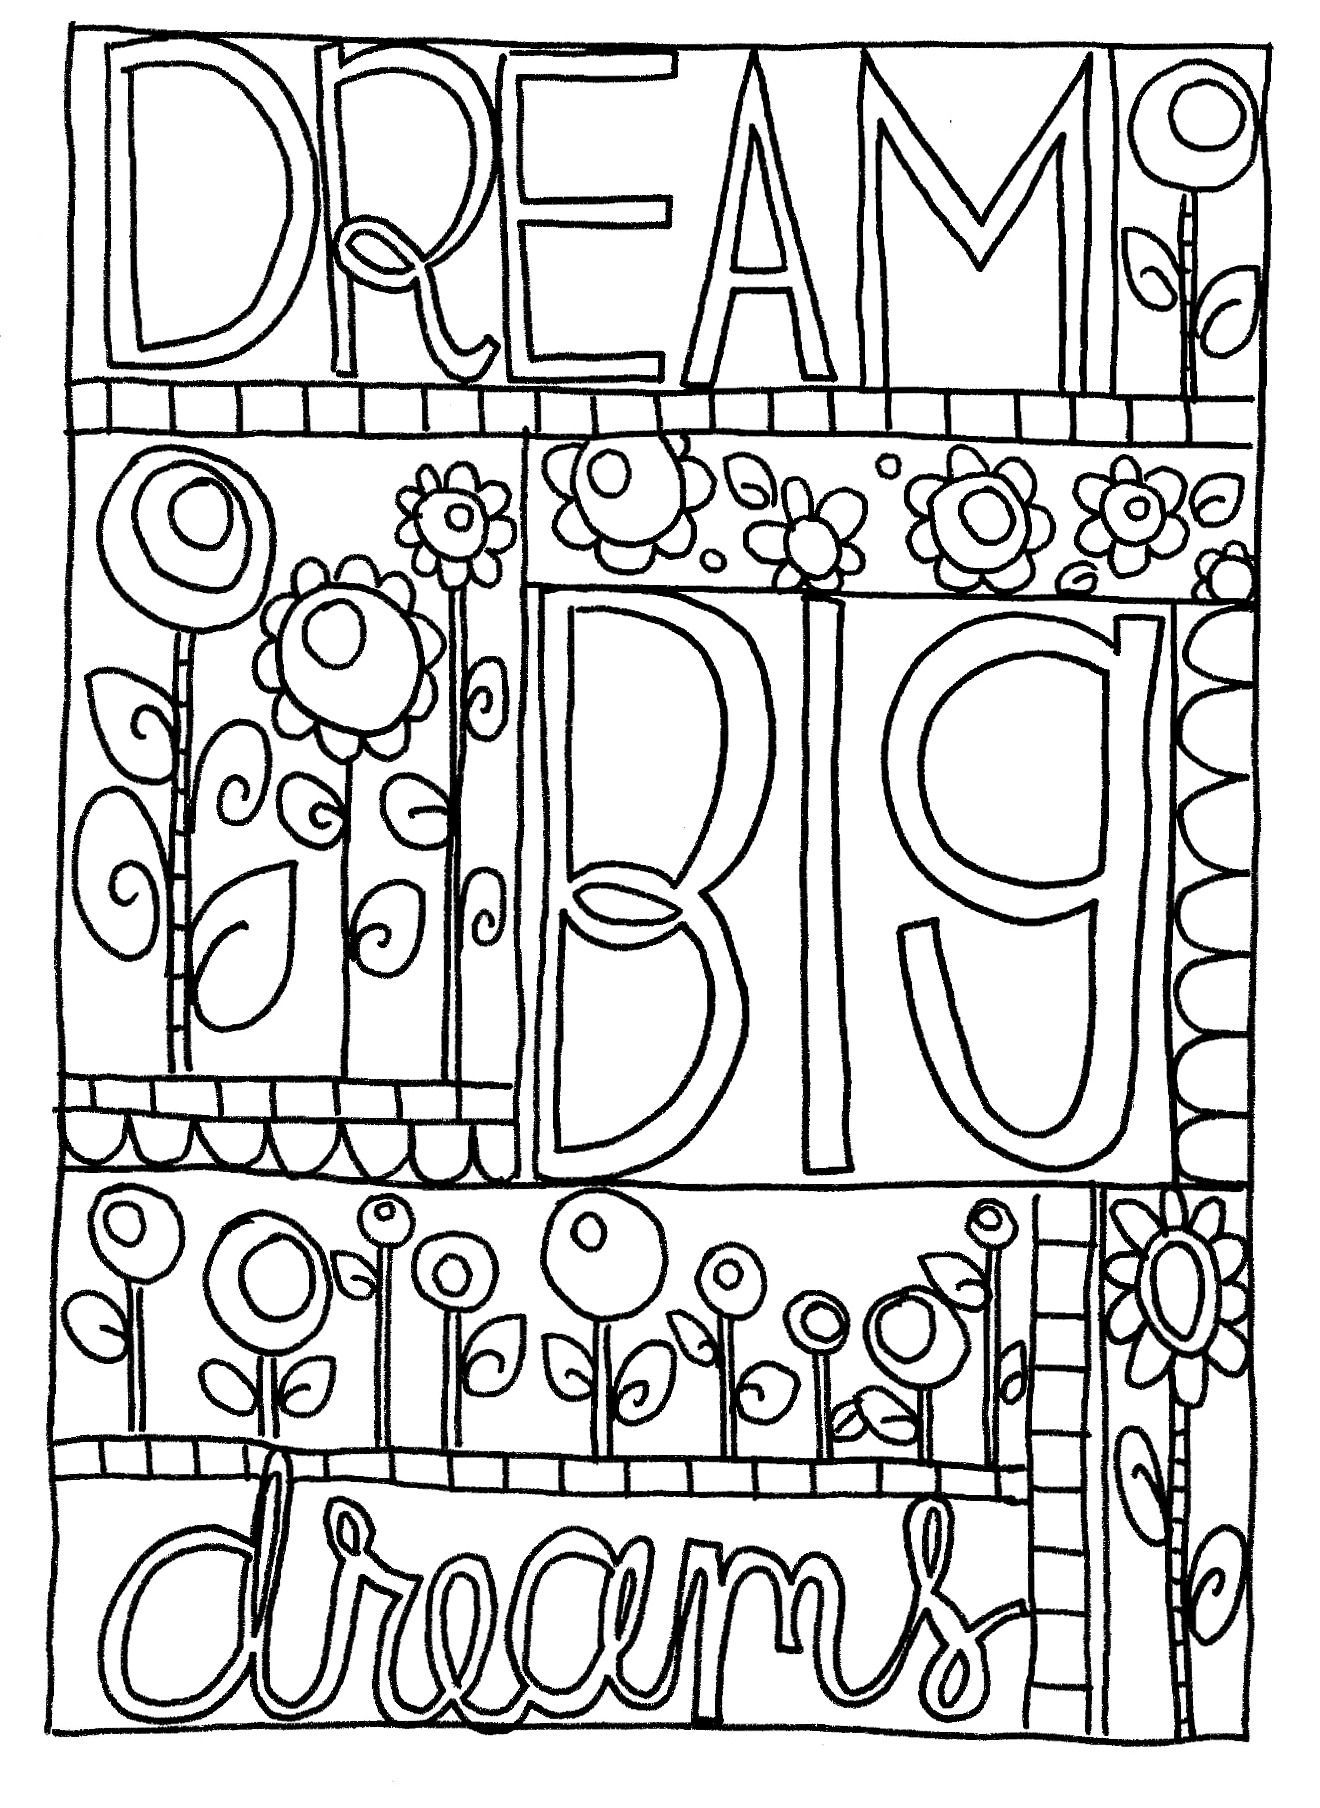 I Have A Dream Coloring Pages at Free printable